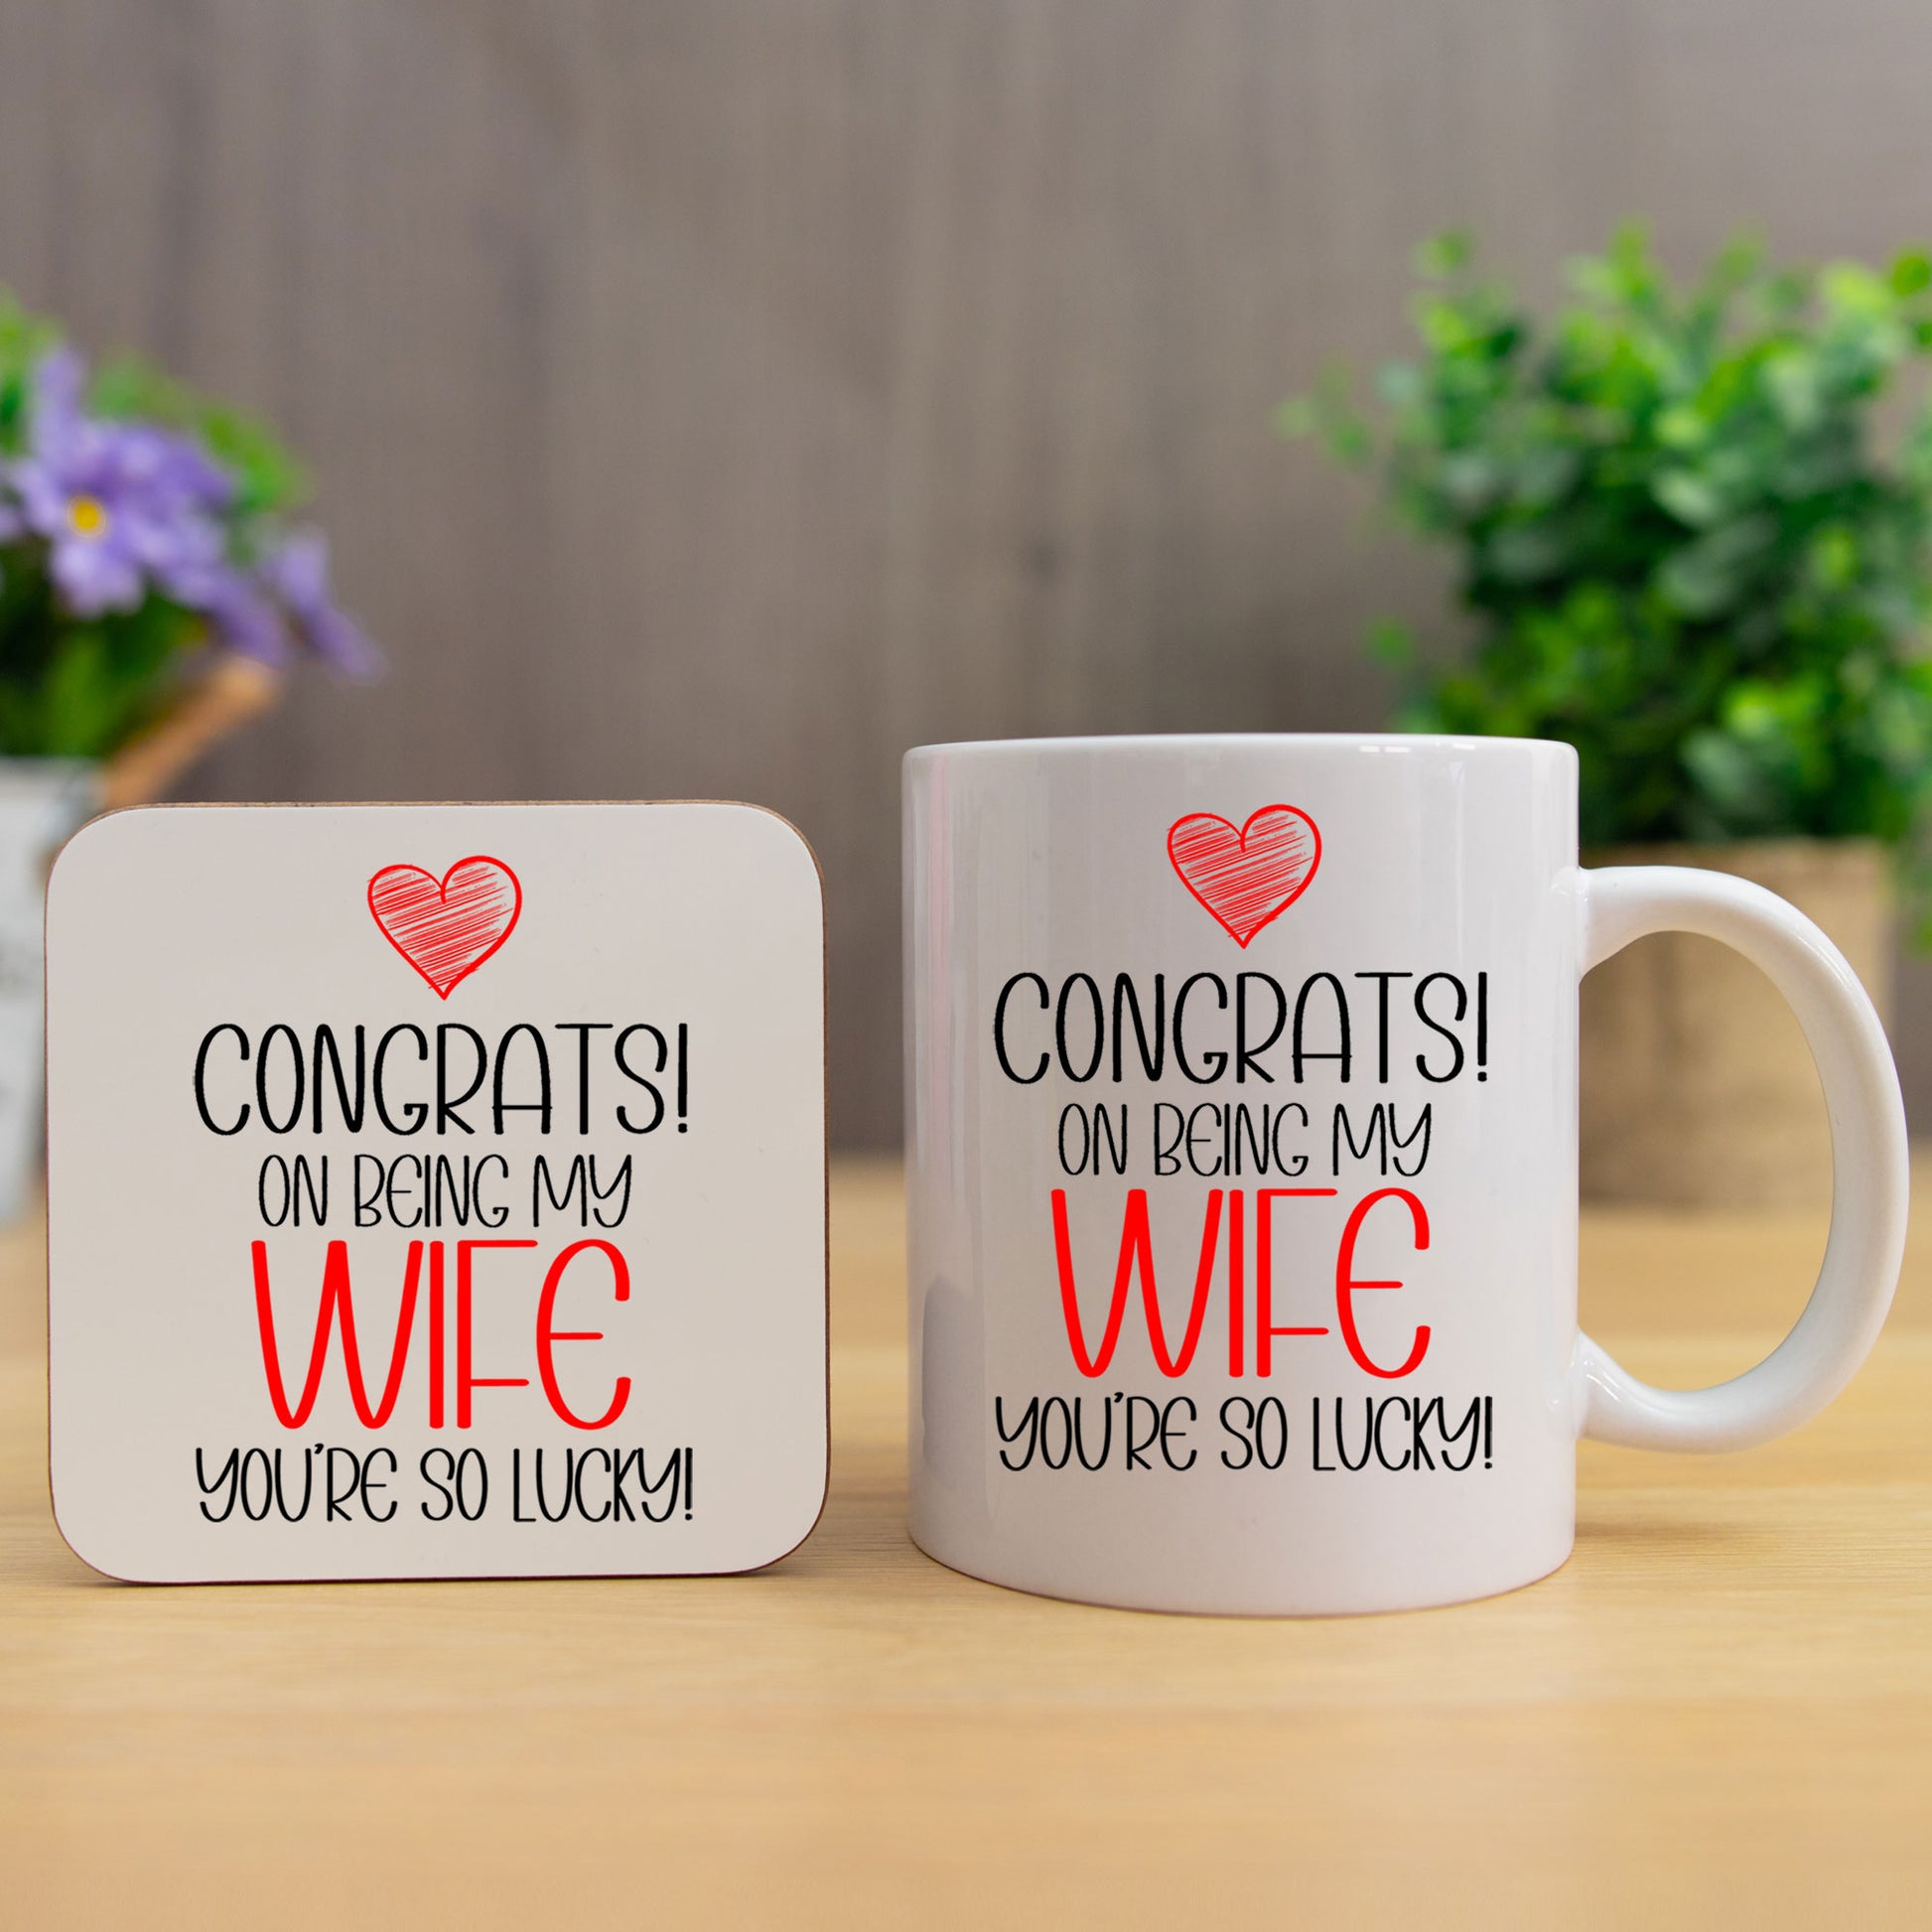 Congrats On Being My Wife Mug and/or Coaster Gift  - Always Looking Good - So Lucky Mug & Coaster Set  